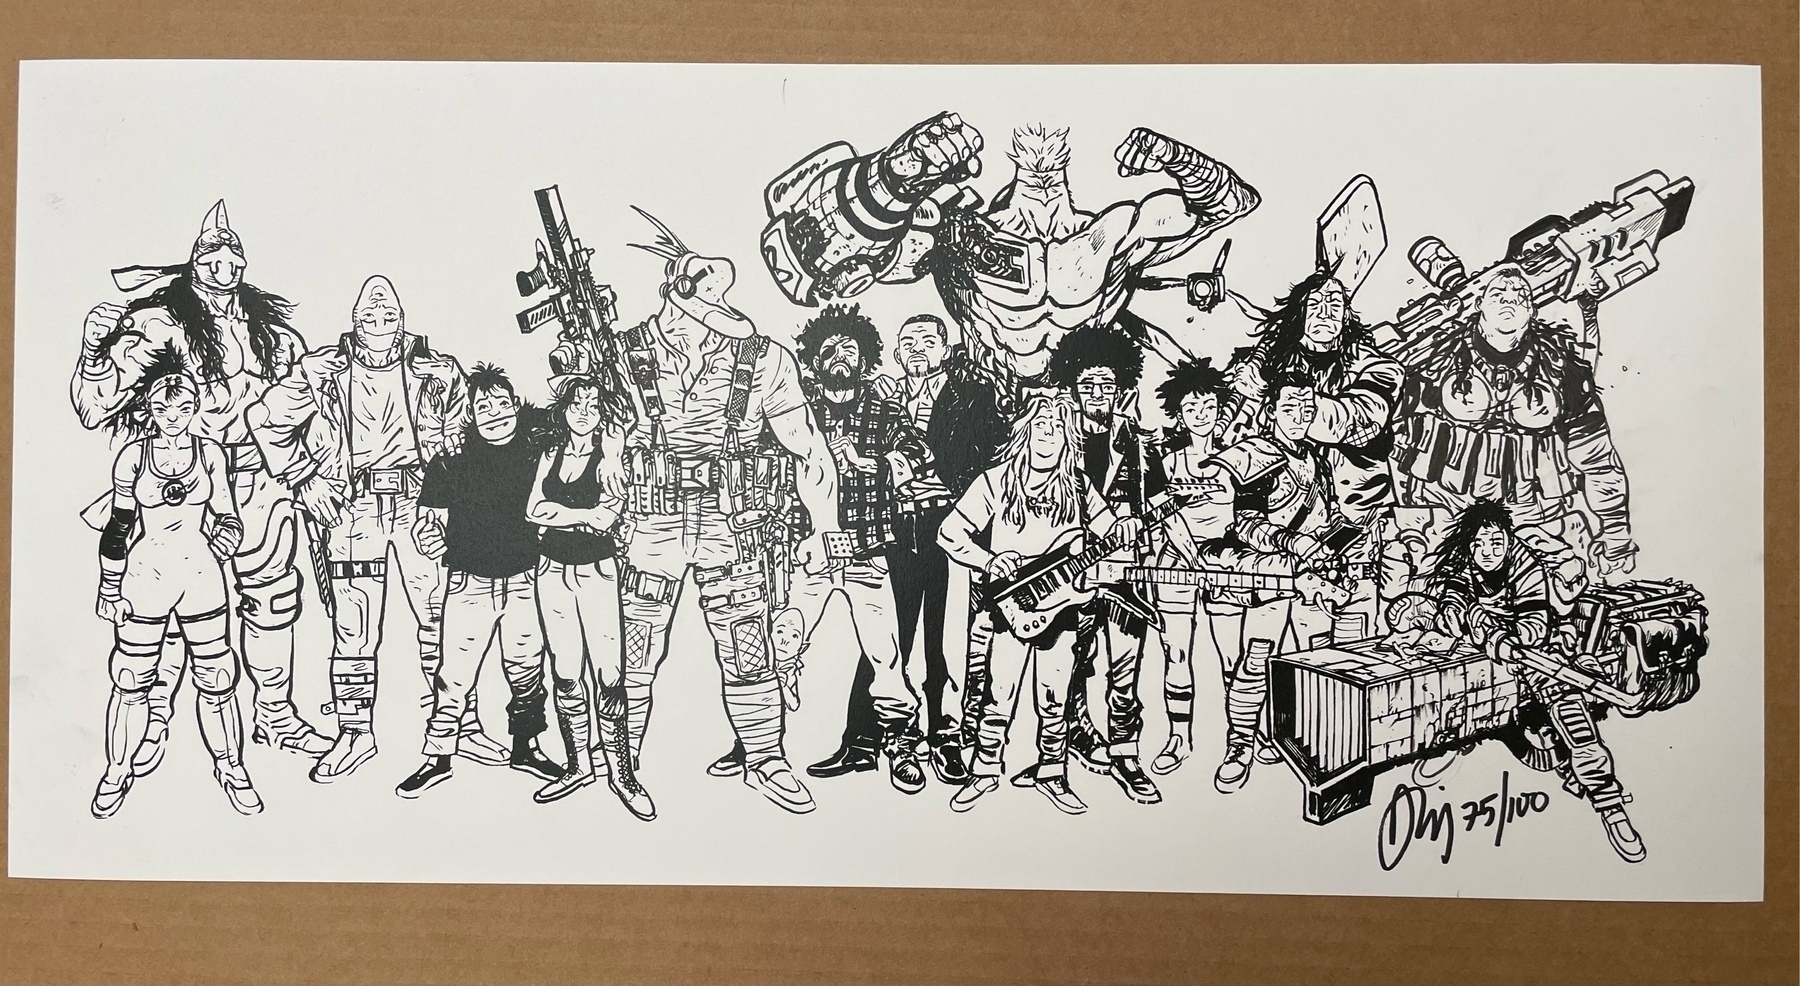 "The Worlds of Daniel Warren Johnson" black and white print with a commissioned Meshiba character sketch